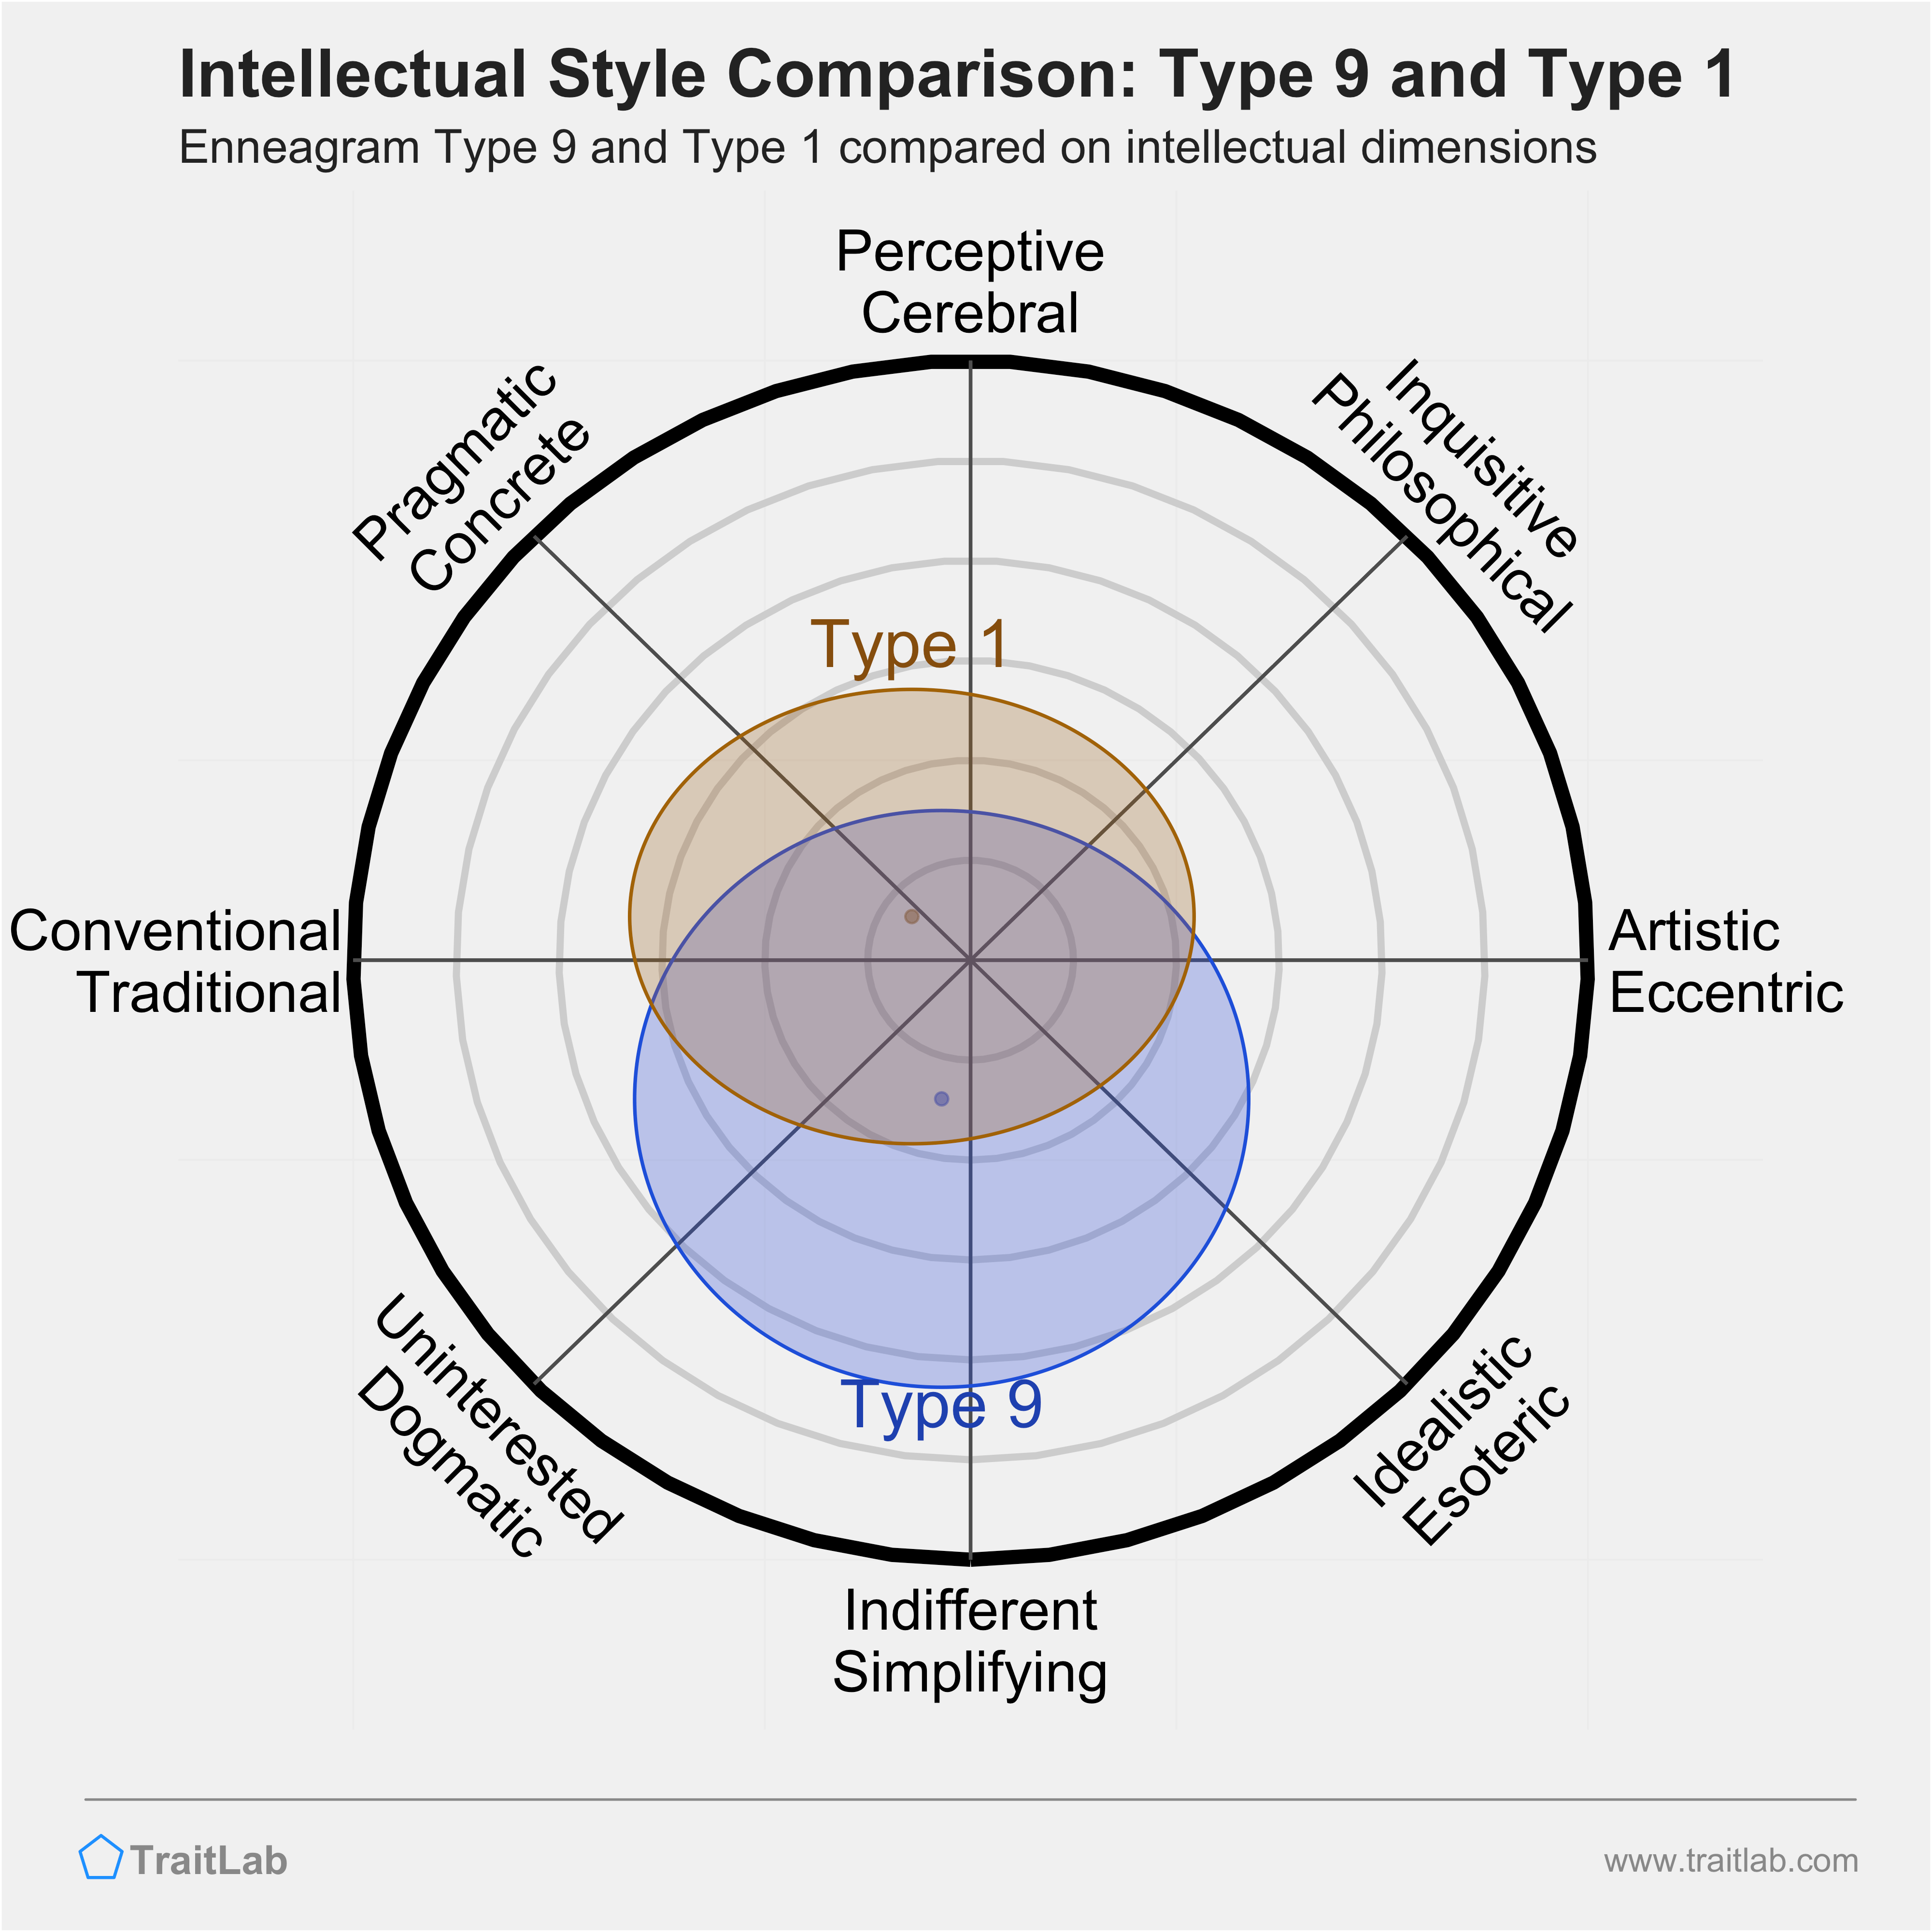 Type 9 and Type 1 comparison across intellectual dimensions